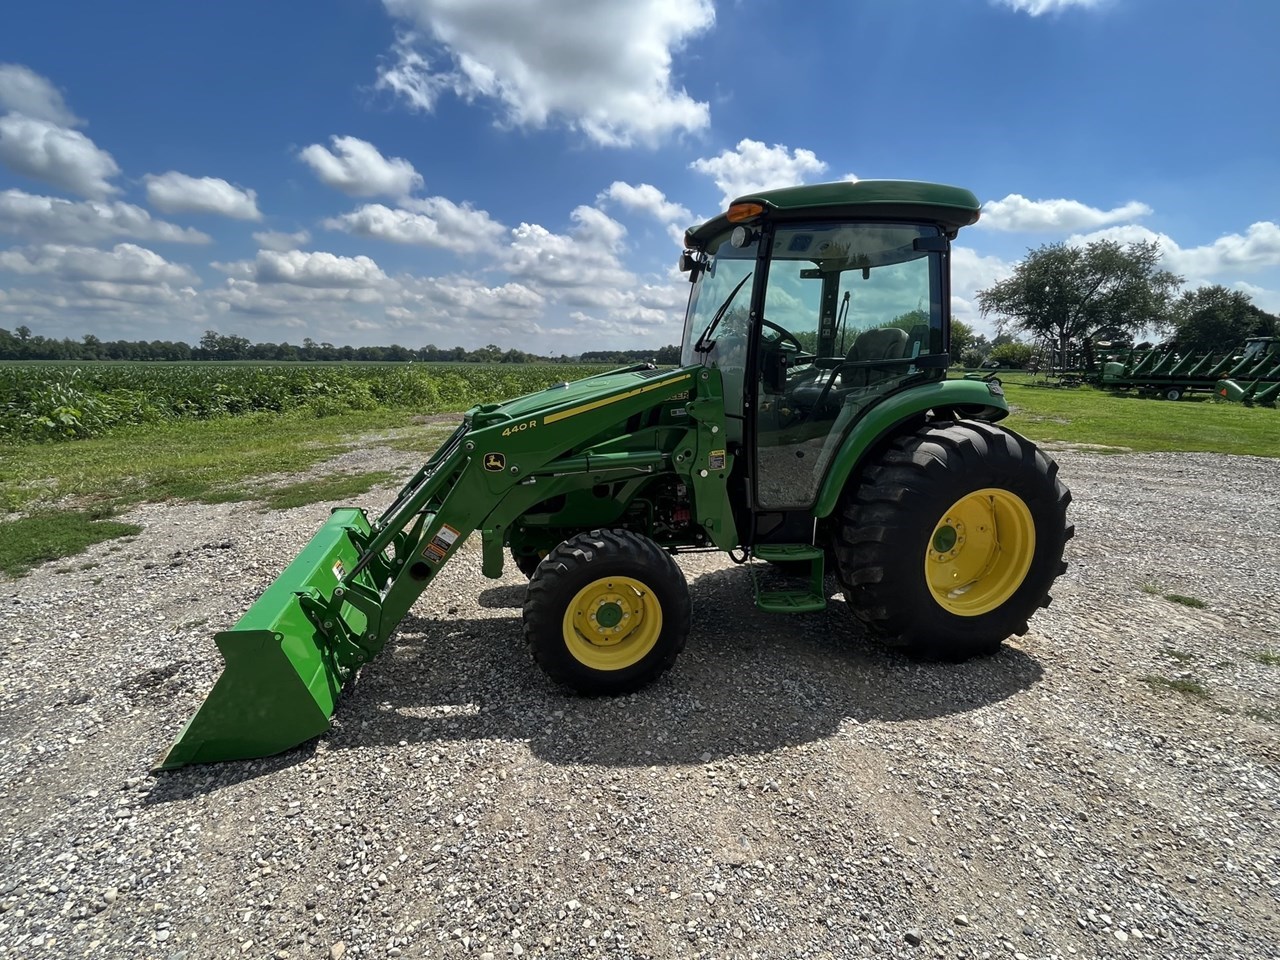 2019 John Deere 4044R Tractor - Compact Utility For Sale